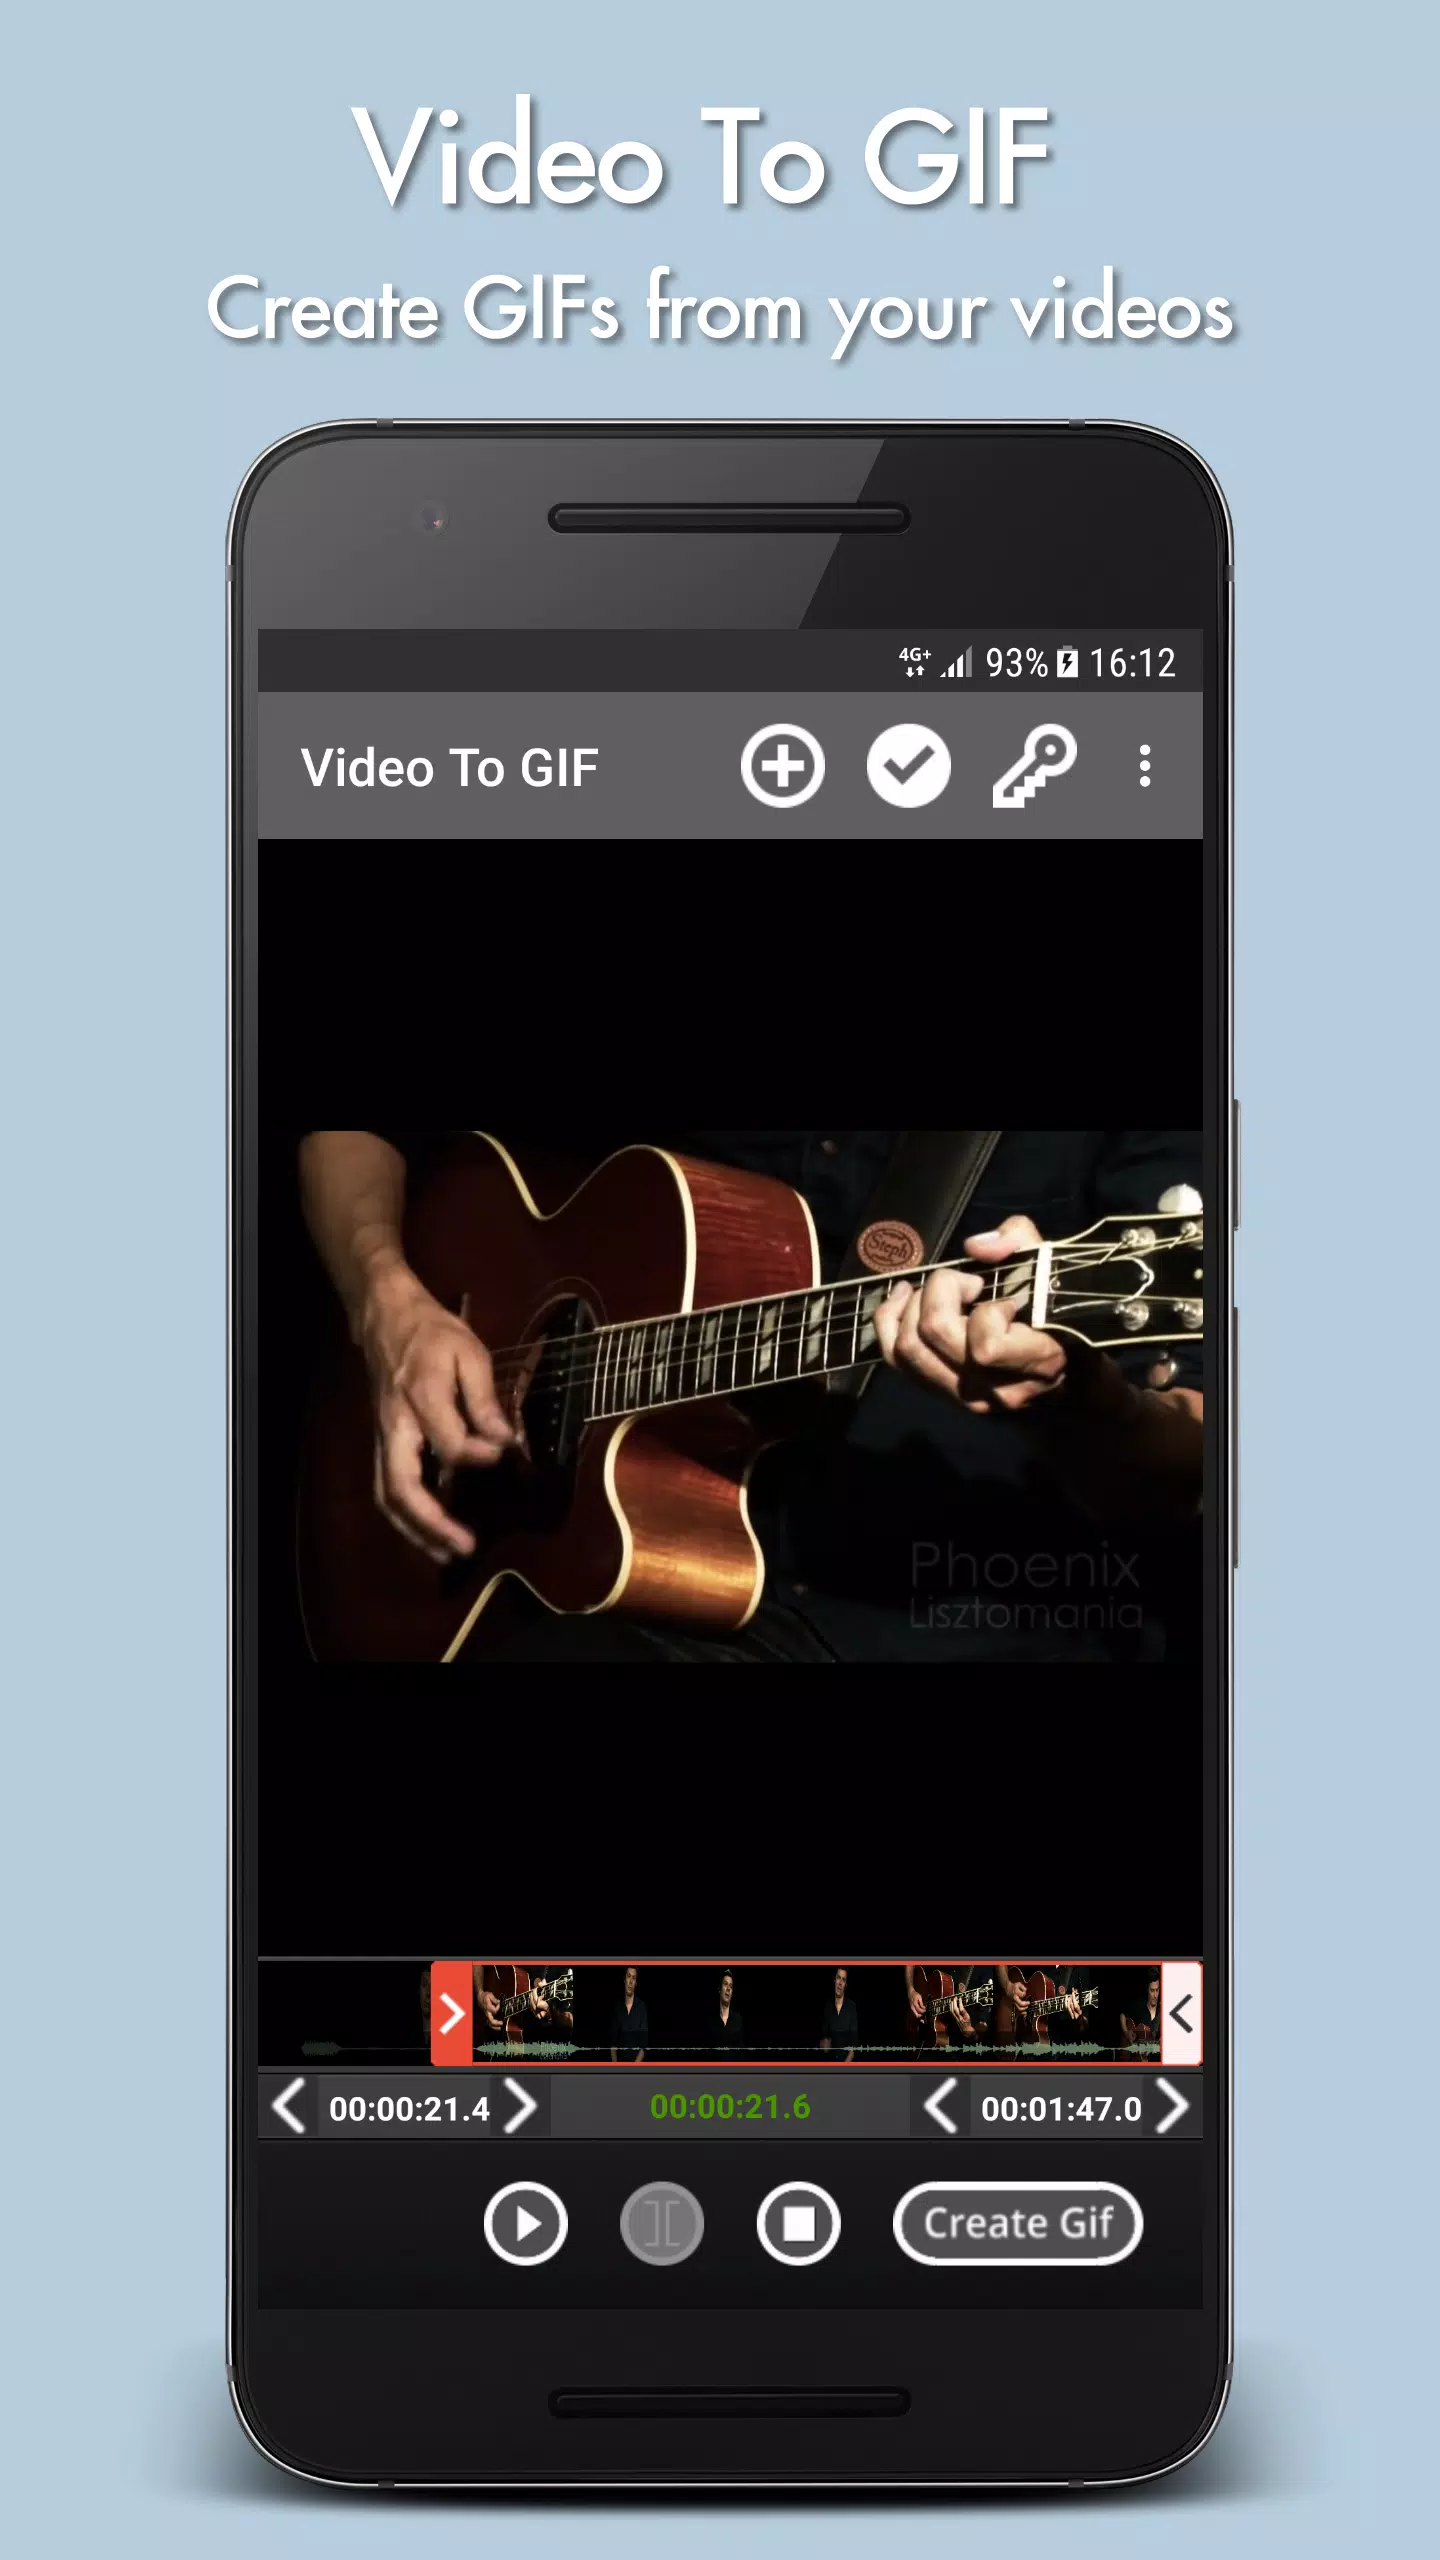 How to Make Video to GIF on Android